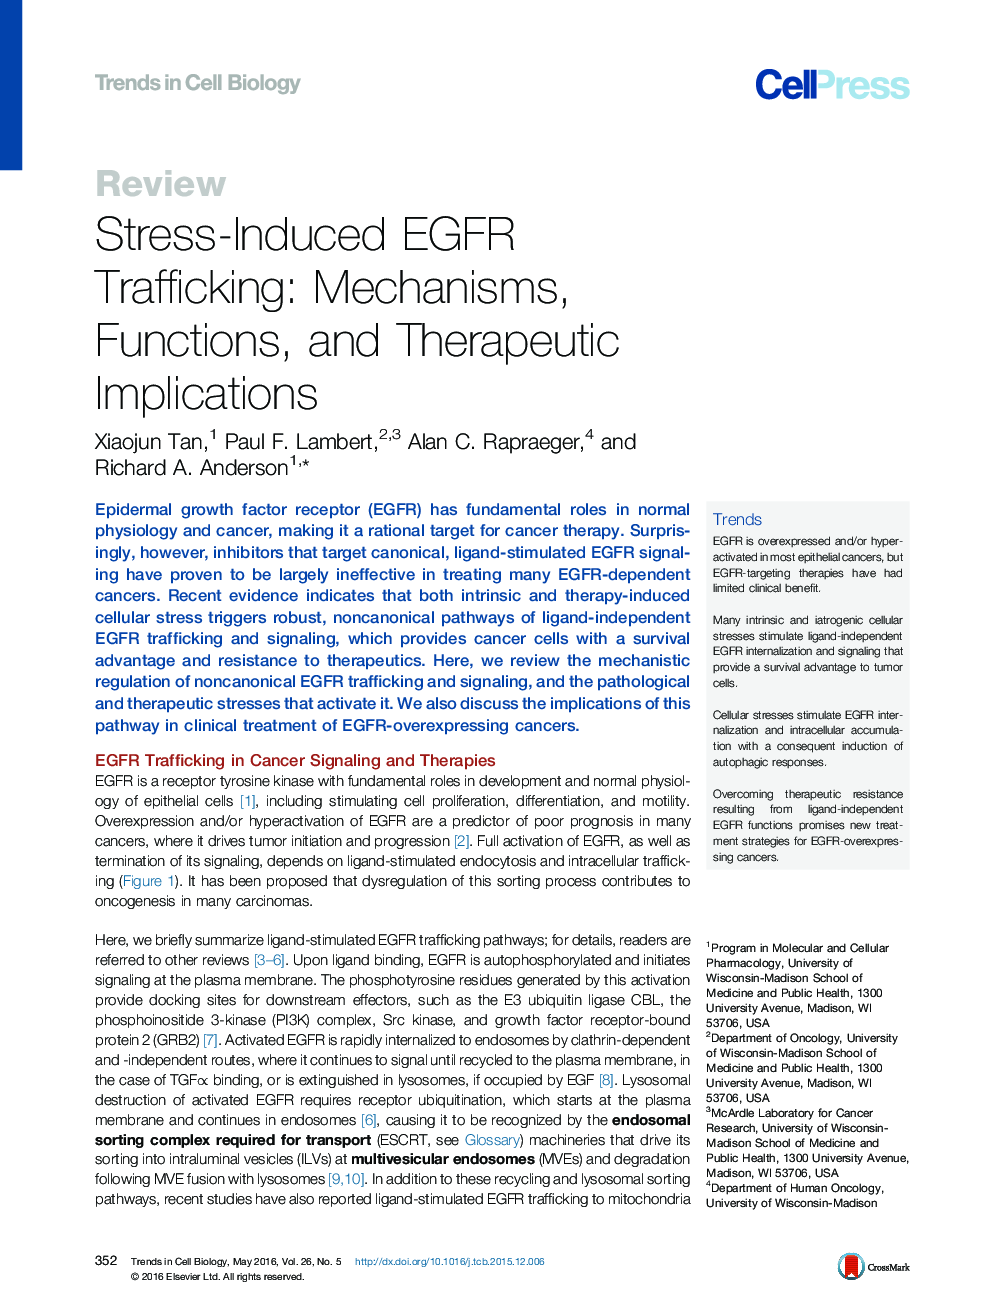 Stress-Induced EGFR Trafficking: Mechanisms, Functions, and Therapeutic Implications